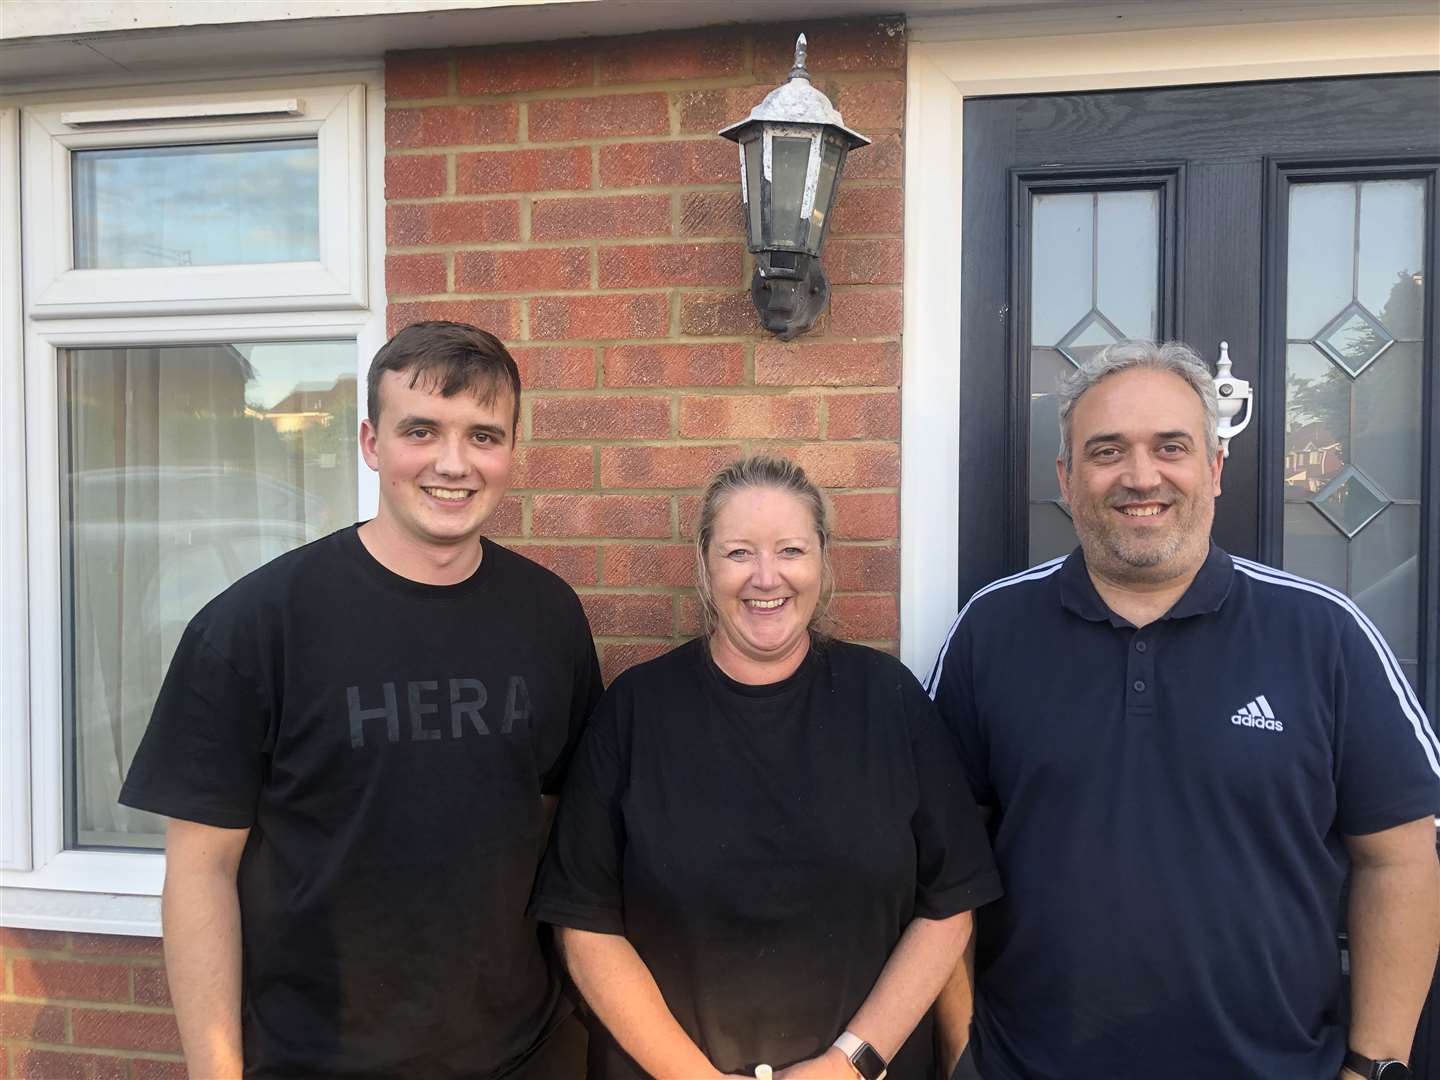 From left: Luke, Emma, and Kevin Eagle outside their home in Northfleet